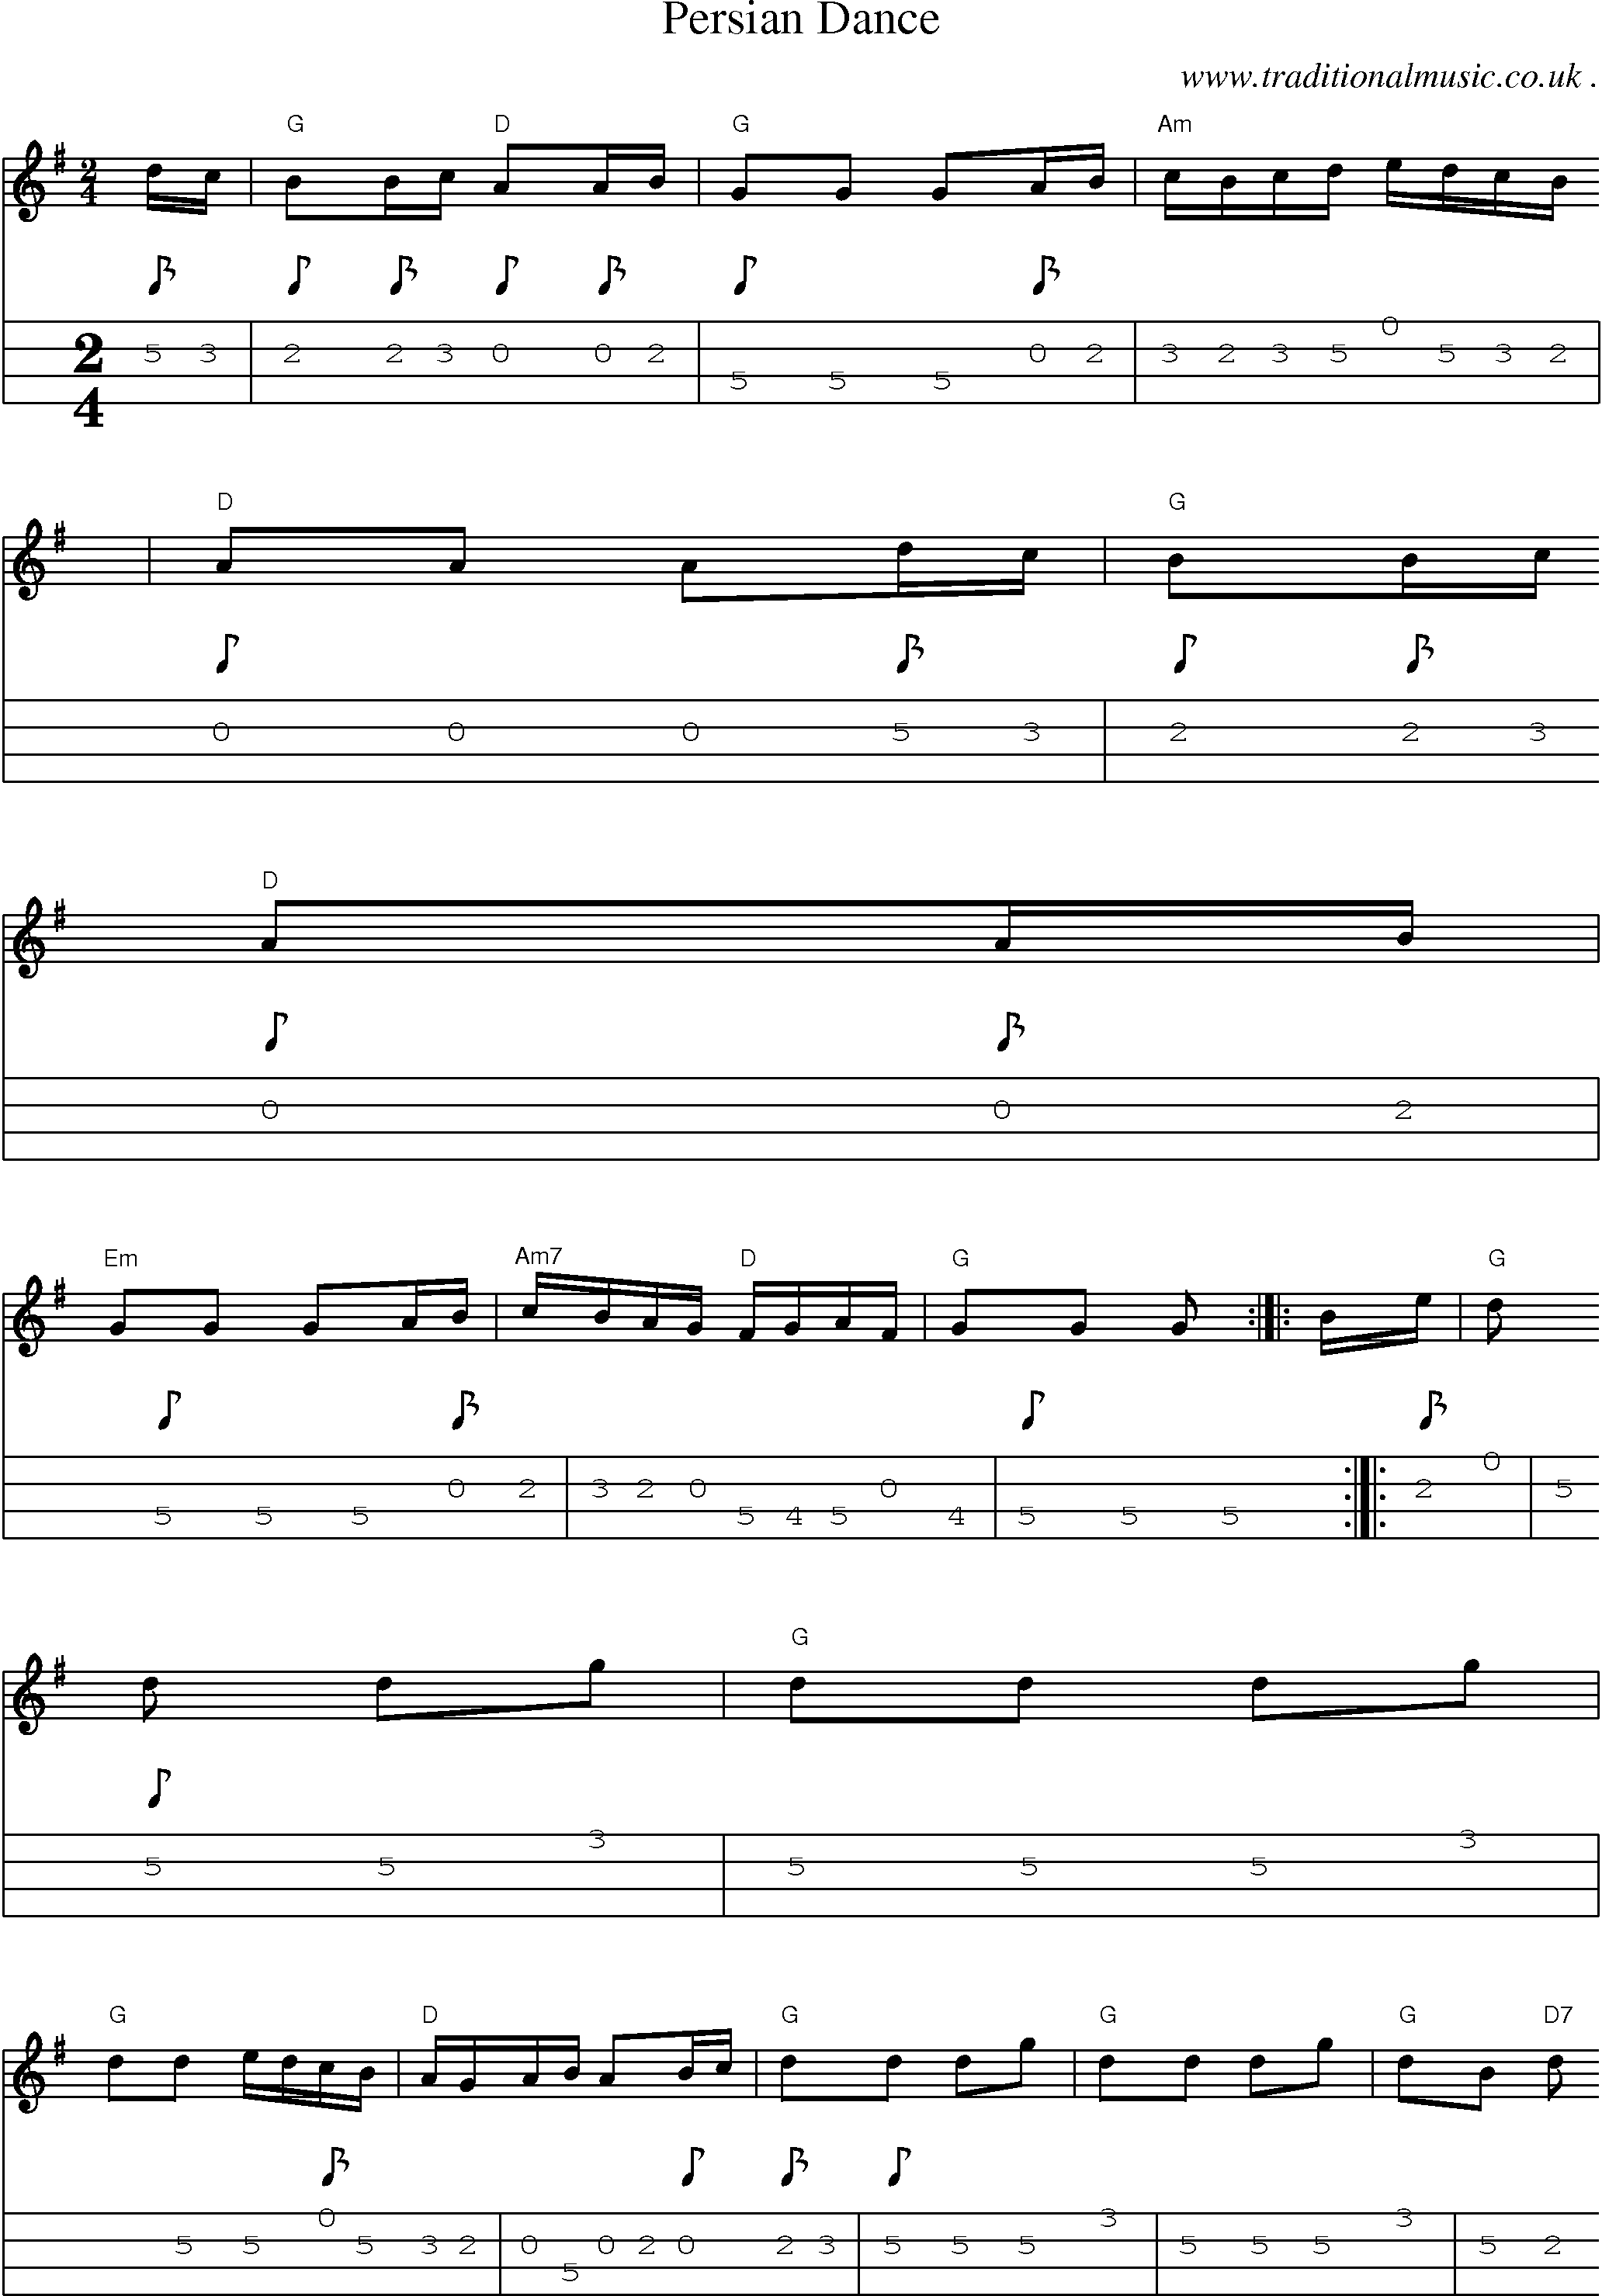 Sheet-music  score, Chords and Mandolin Tabs for Persian Dance